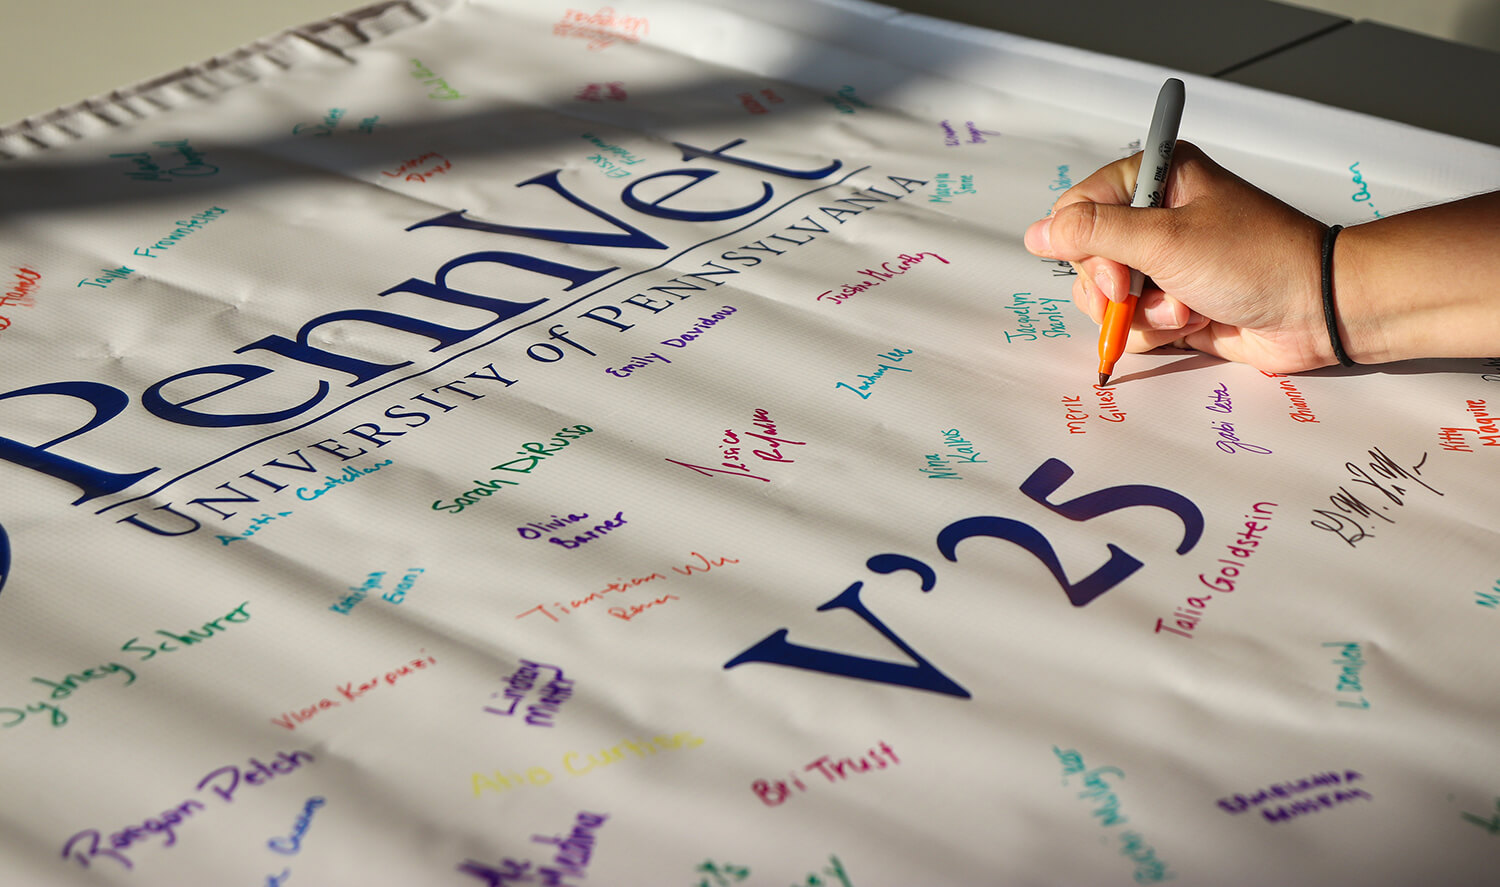 A student signs the Class banner that will hang in the student lounge.